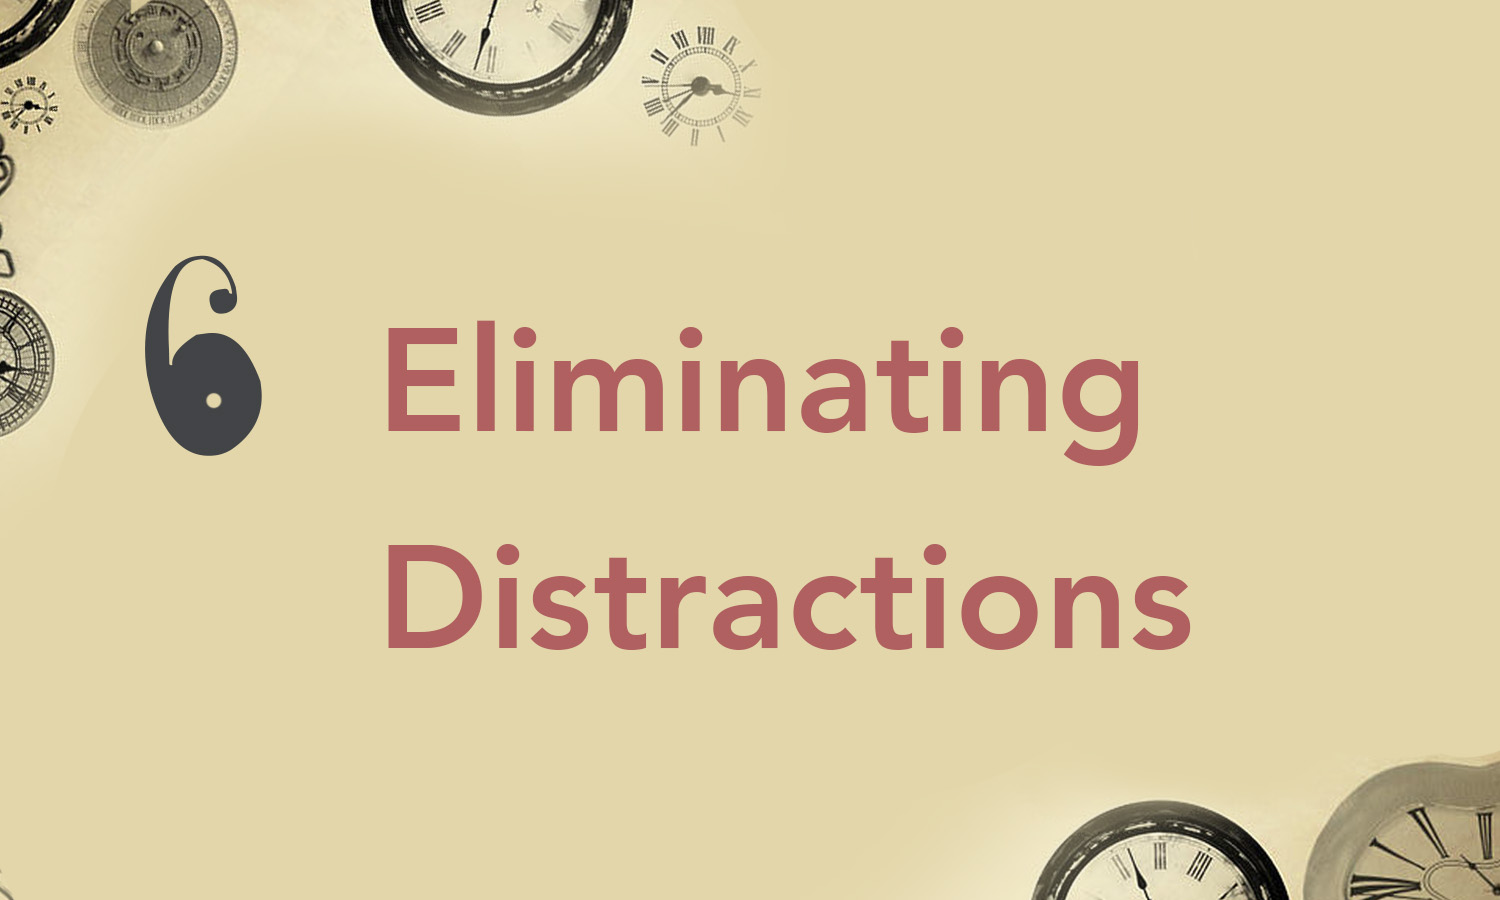 6distractions